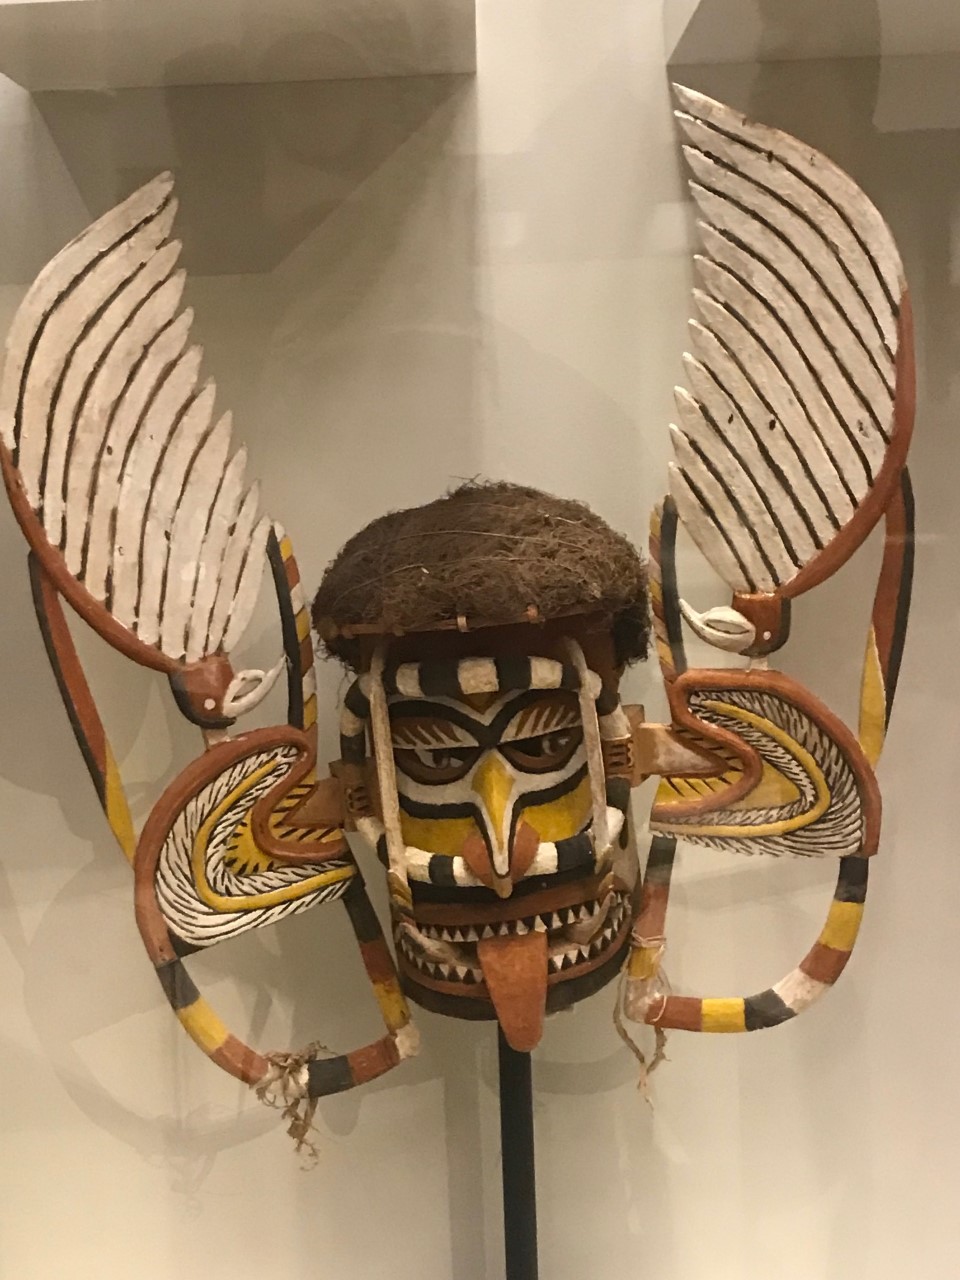 Maori mask from the Museum of Natural History in Sydney Australia